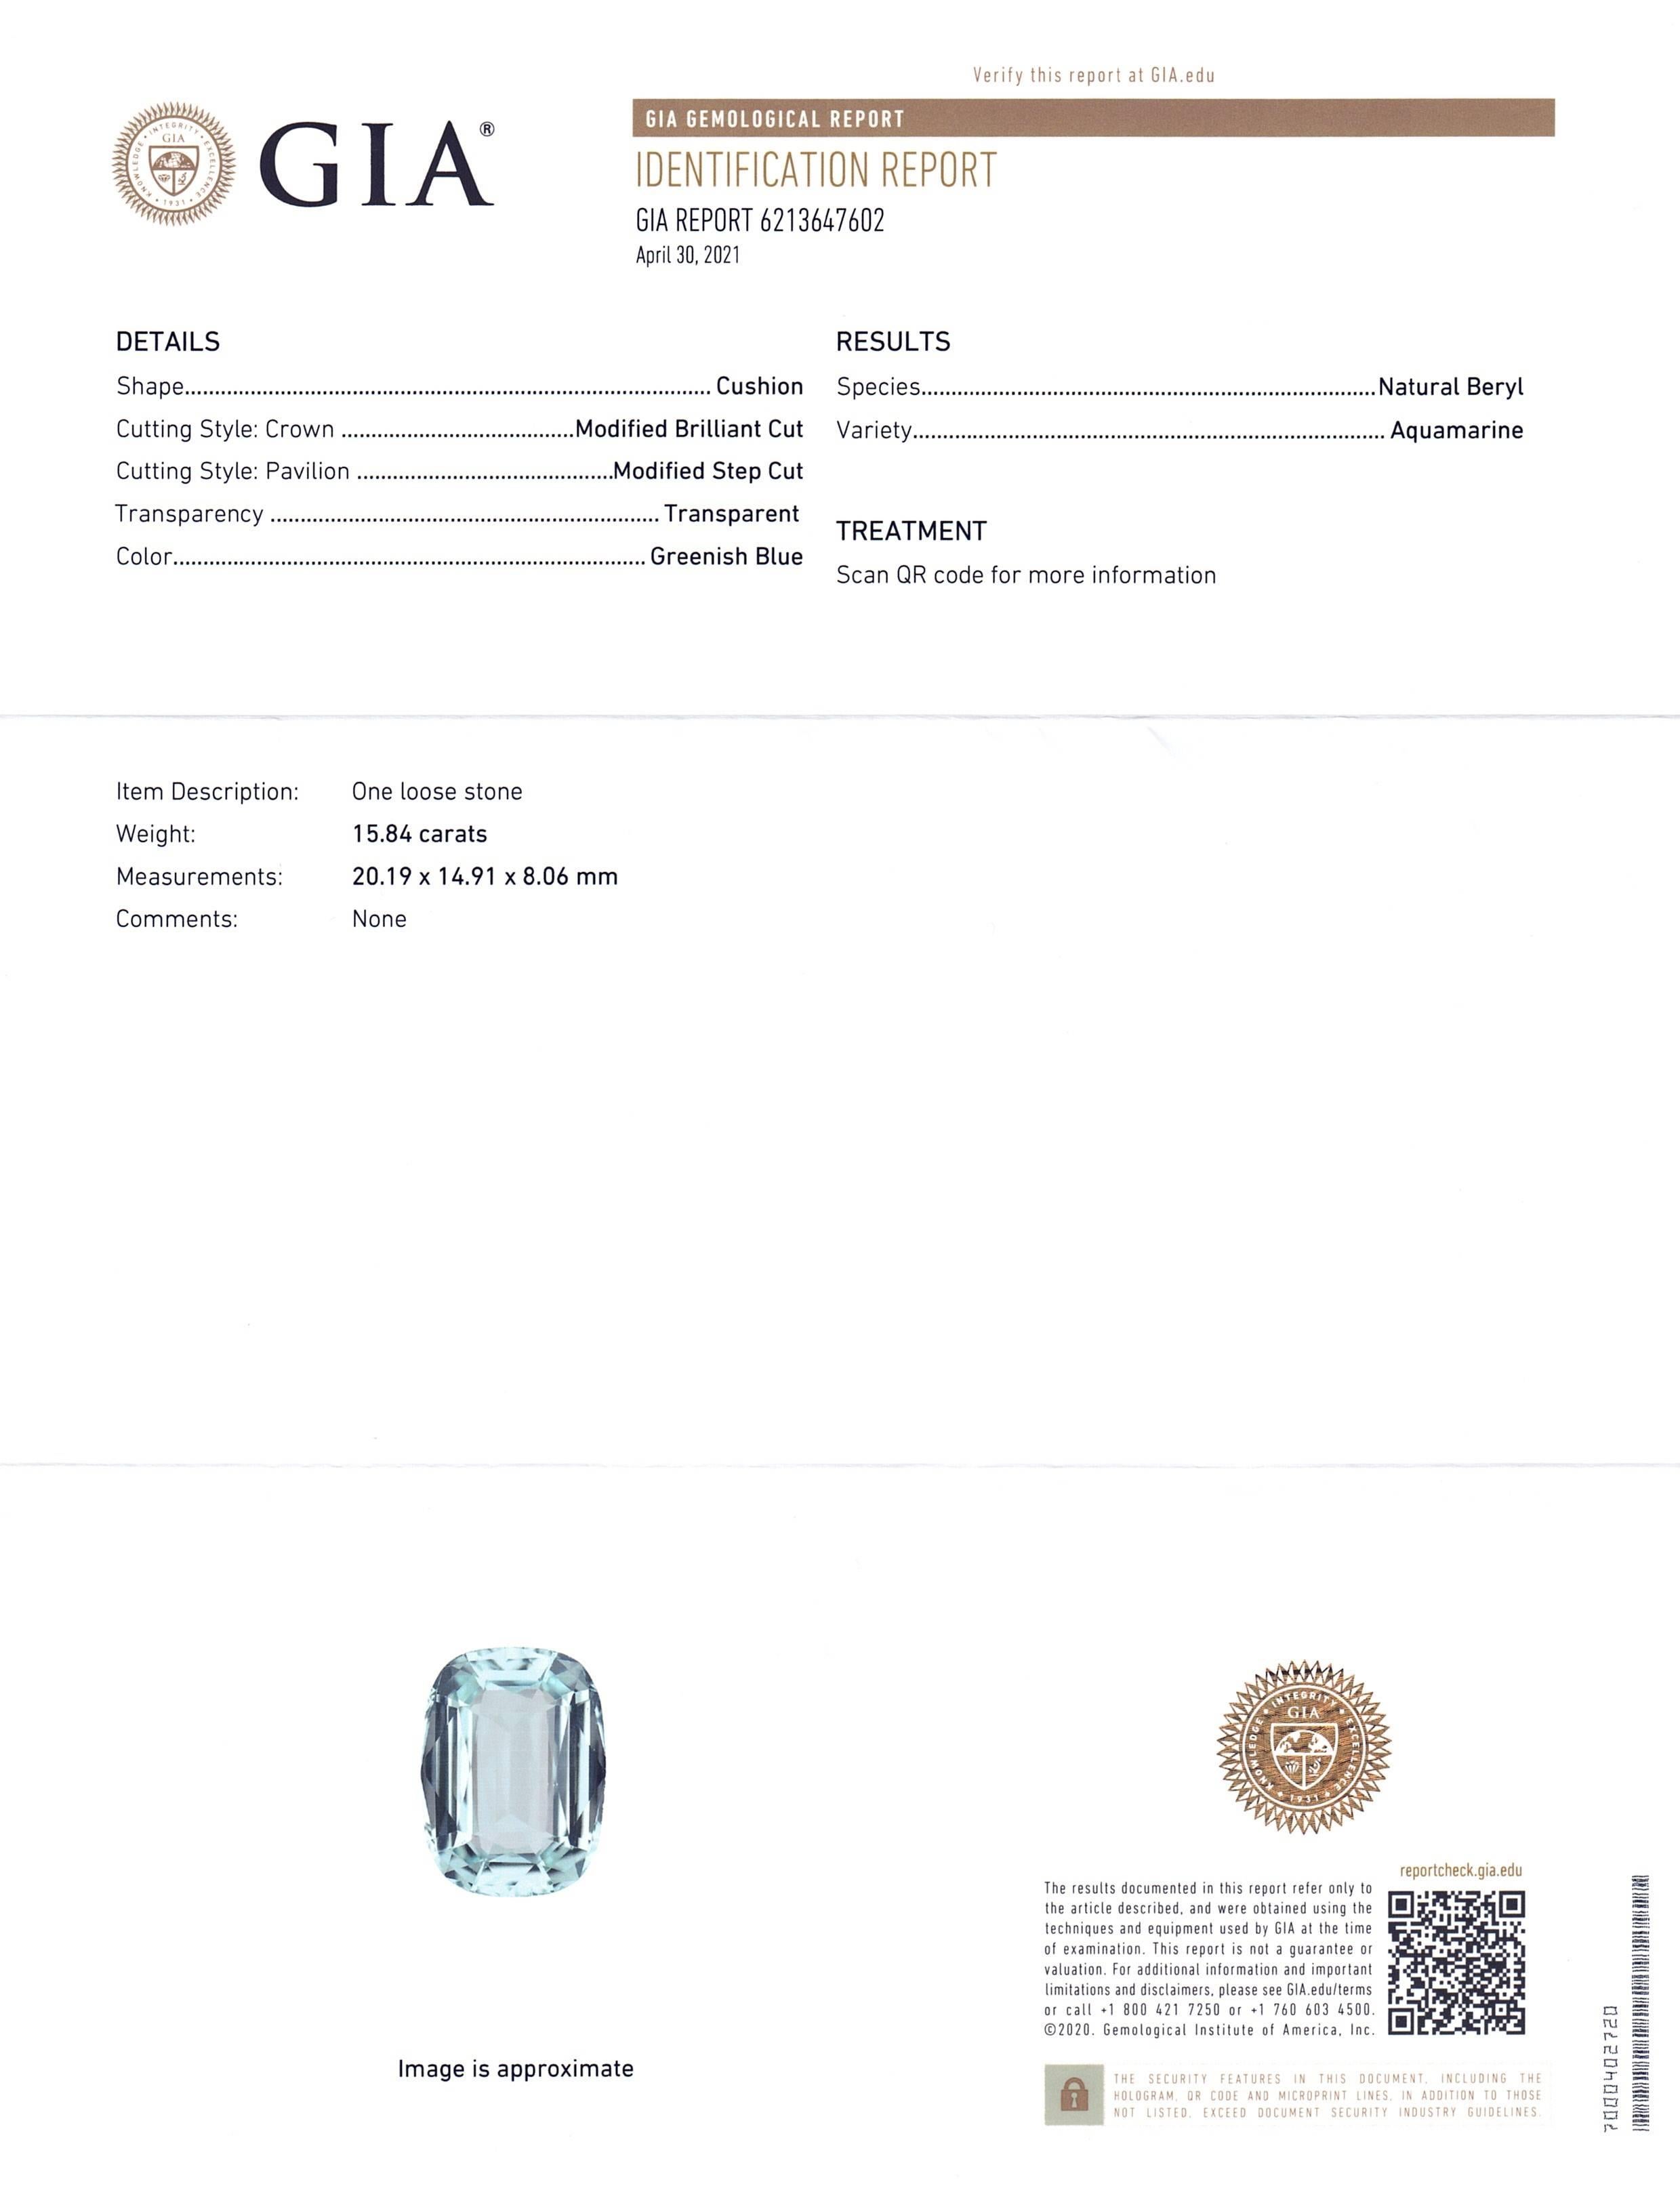 This is a stunning GIA Certified Aquamarine 

The GIA report reads as follows:

GIA Report Number: 6213647602
Shape: Cushion
Cutting Style: 
Cutting Style: Crown: Modified Brilliant Cut
Cutting Style: Pavilion: Modified Step Cut
Transparency: